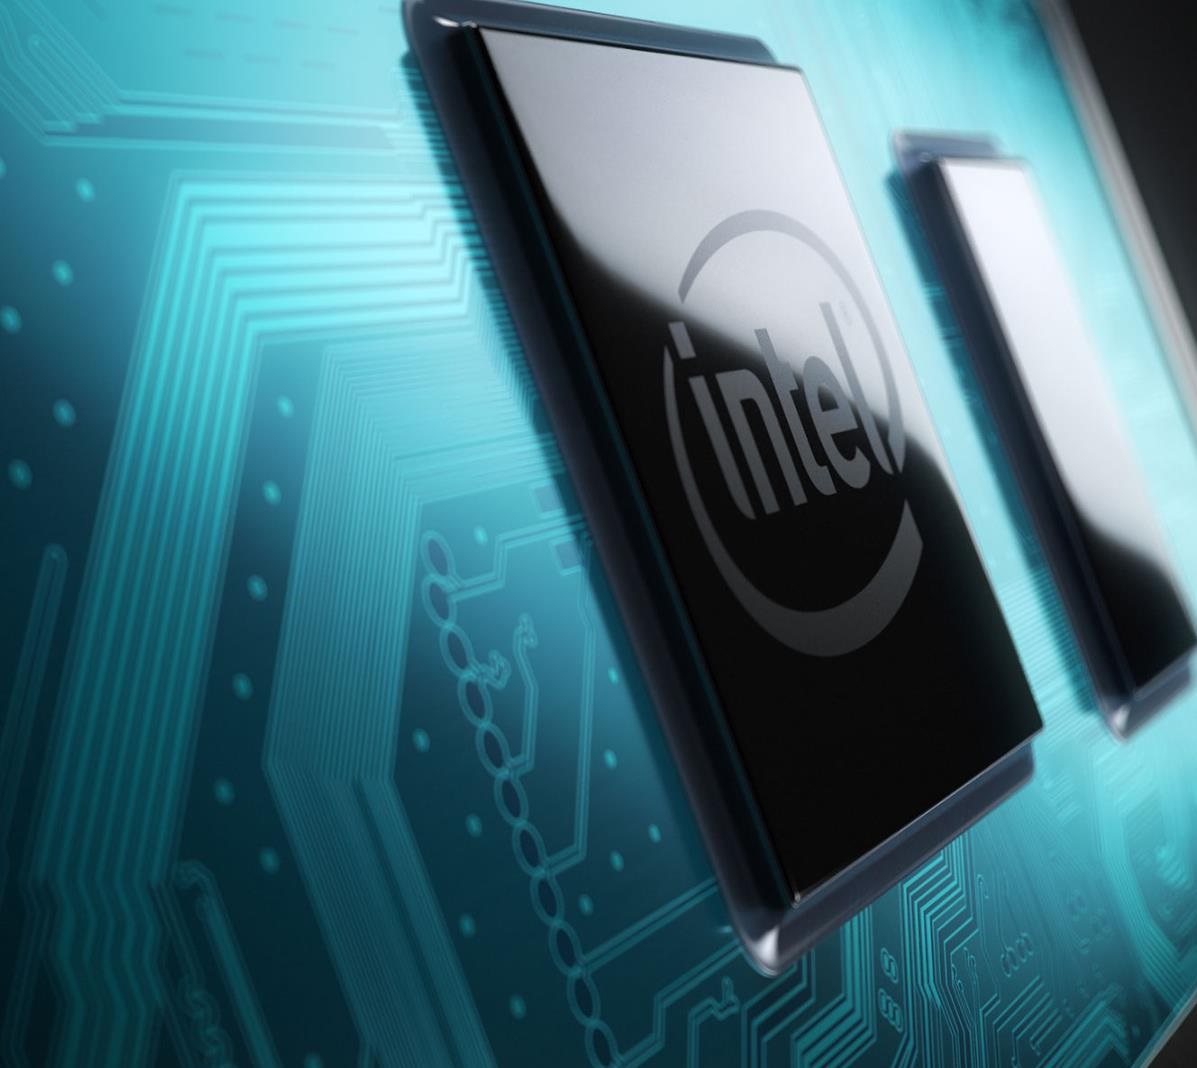 Leaked Intel Alder Lake mobile processor details reveal three new processor segments, including a 55 W option and Core i9 processors for thin and light laptops